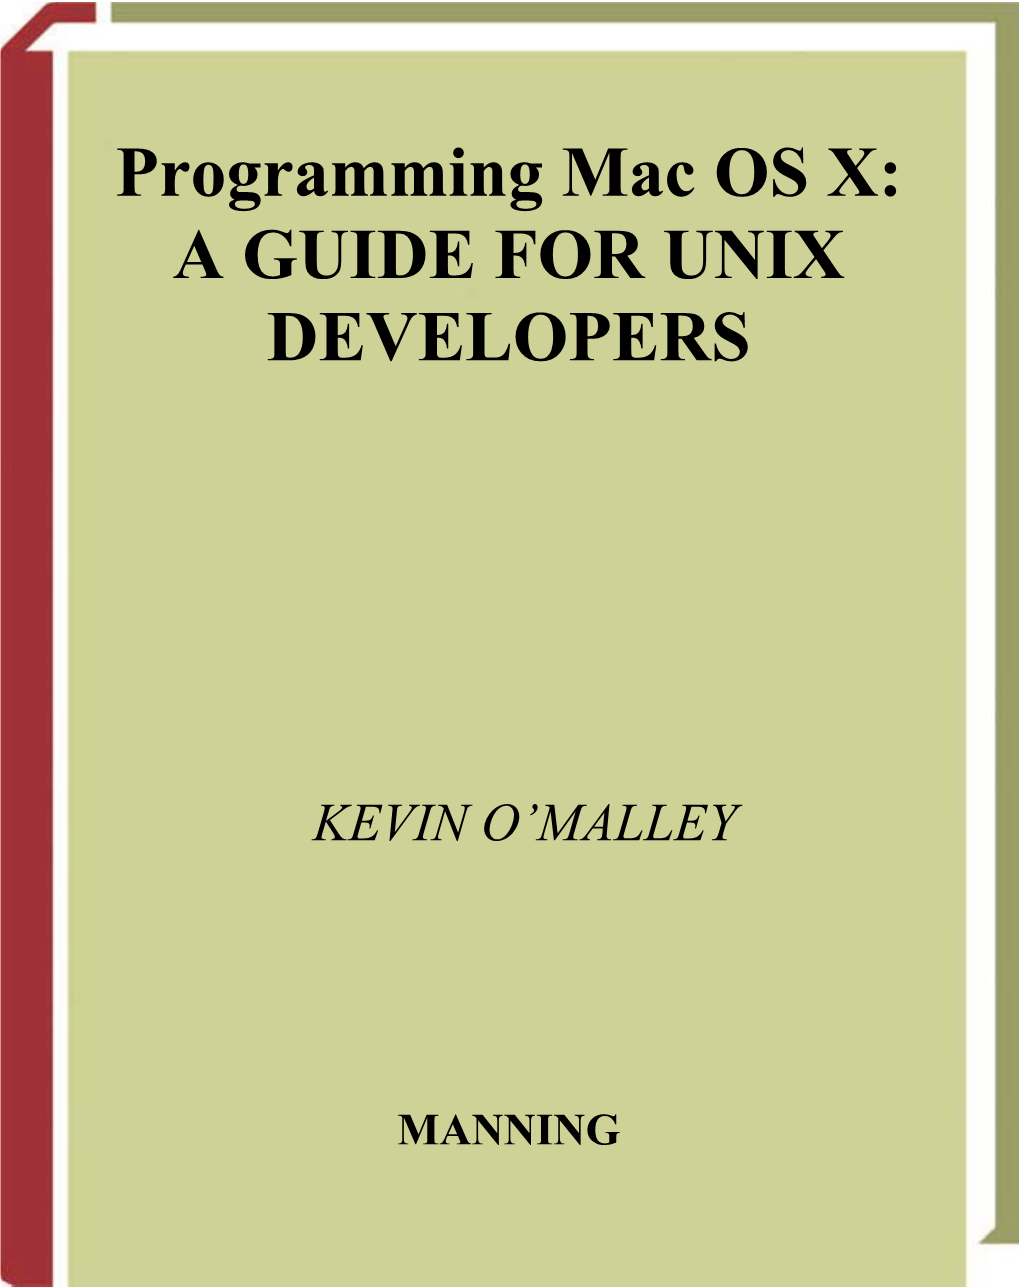 Programming Mac OS X: a GUIDE for UNIX DEVELOPERS